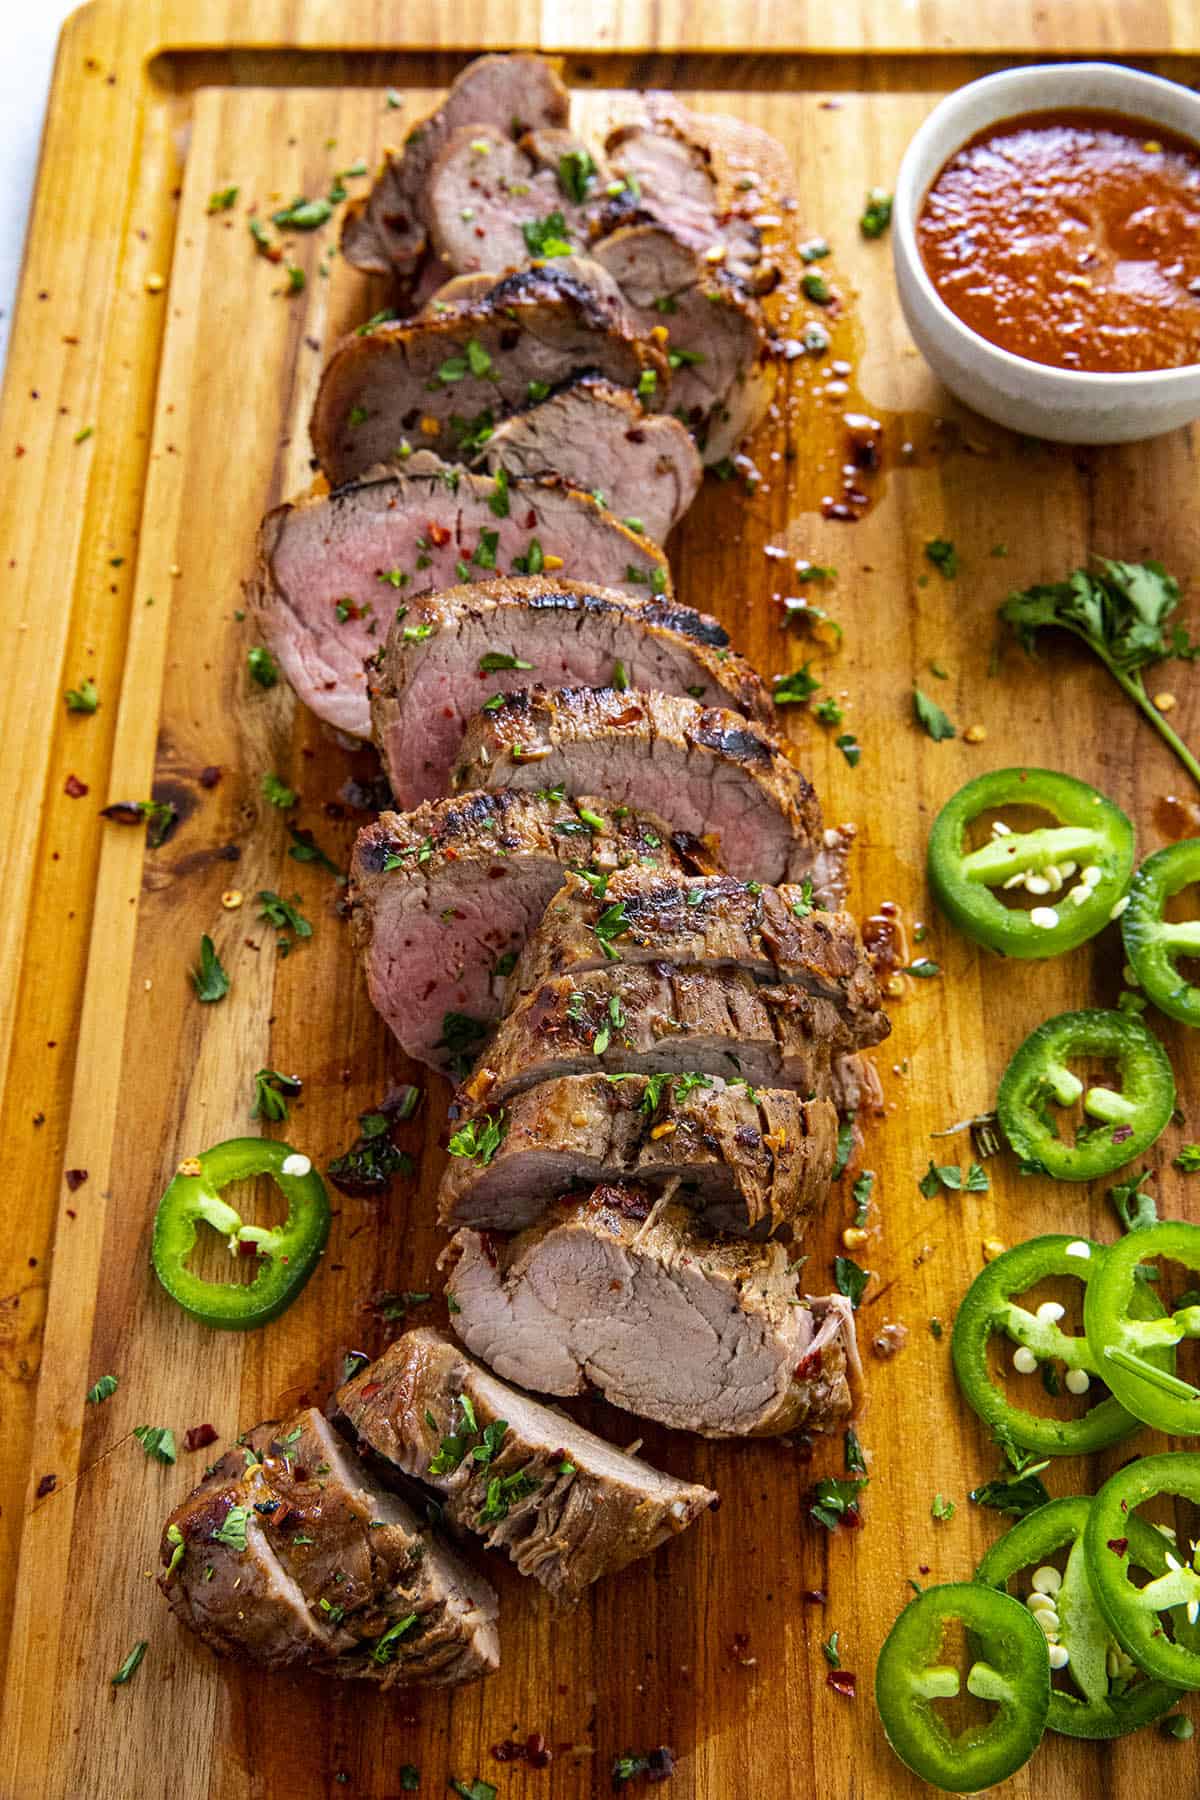 Sliced and grilled marinated pork tenderloin with bbq sauce, ready to serve